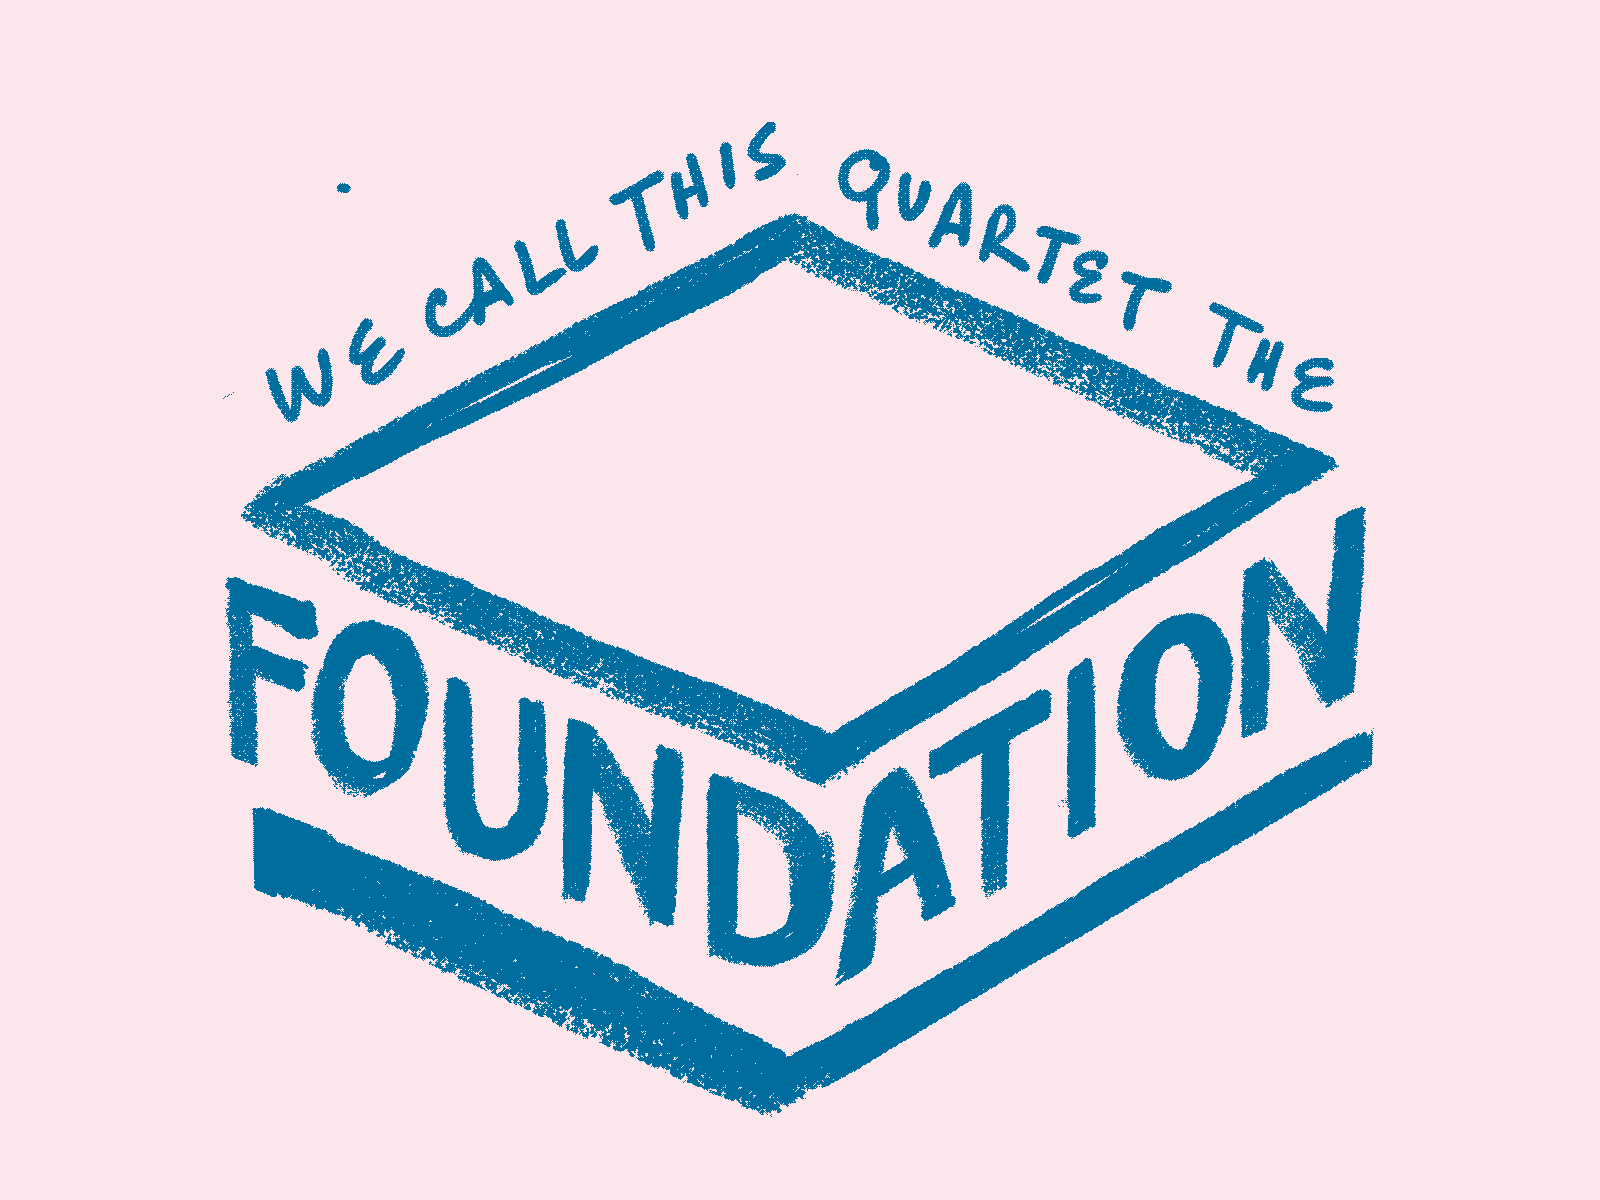 Illustration of a crude foundation stone, with the words 'We call this quartet the FOUNDATION' written on it.